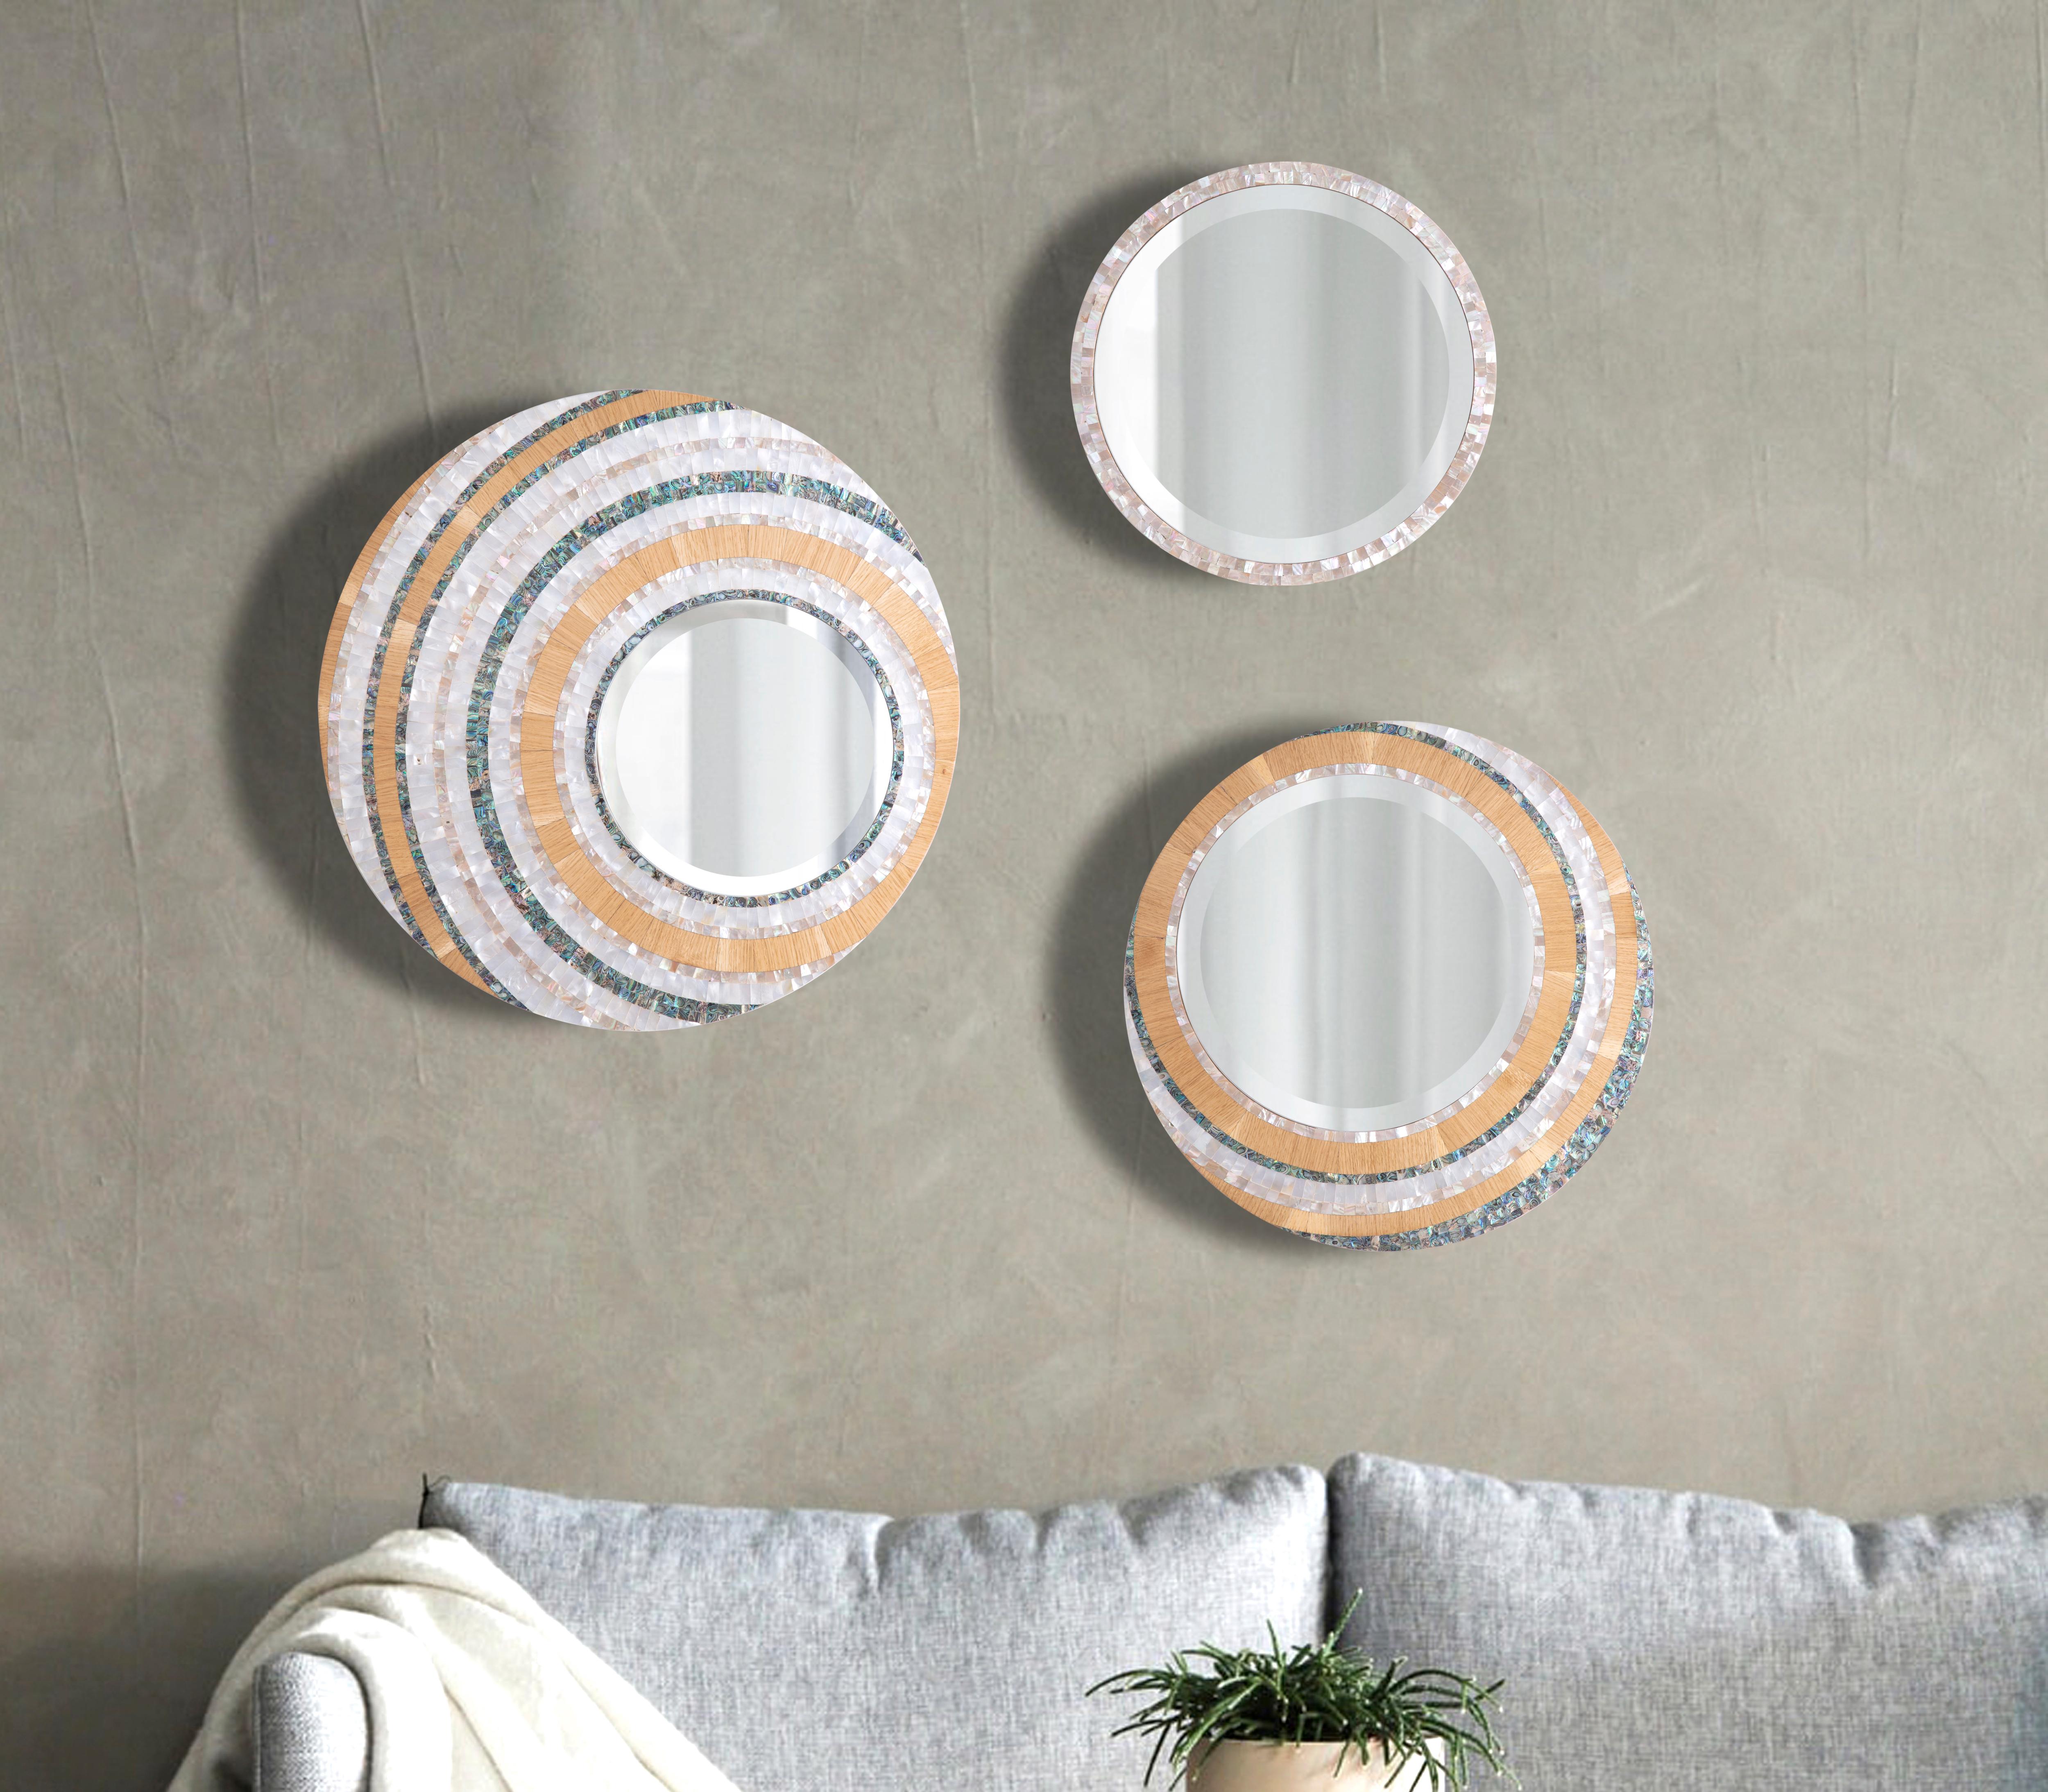 Hand-crafted decorative mirror with three colors of genuine mother-of-pearl - small.
Just like the sun, this trio of mirrors brings rays of warmth and joy to any space. They are intricately designed with three colors of genuine mother-of-pearl and